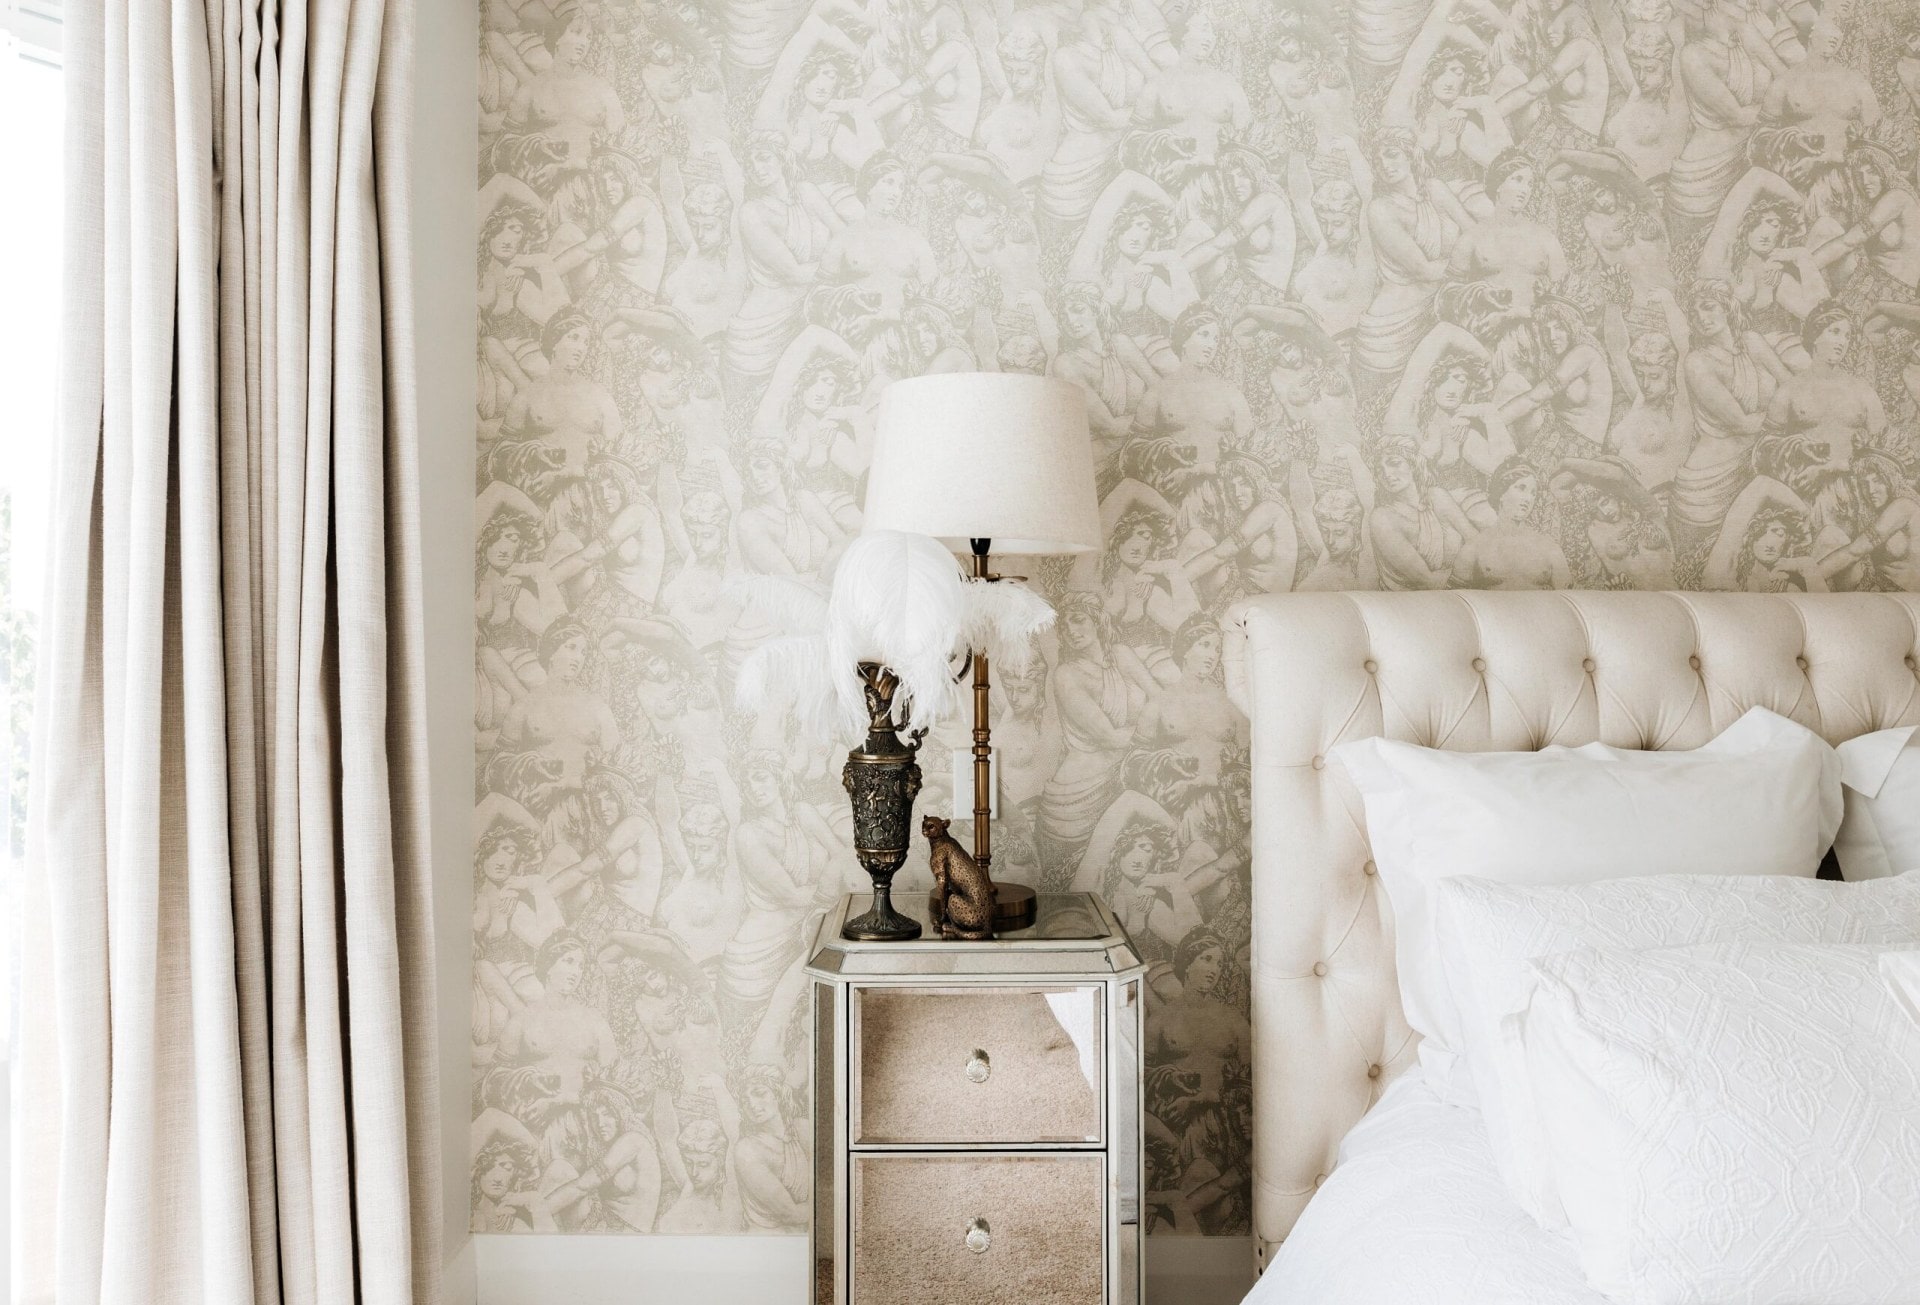 Ornate wallpaper behind a white headboard ,and a glass bedside table